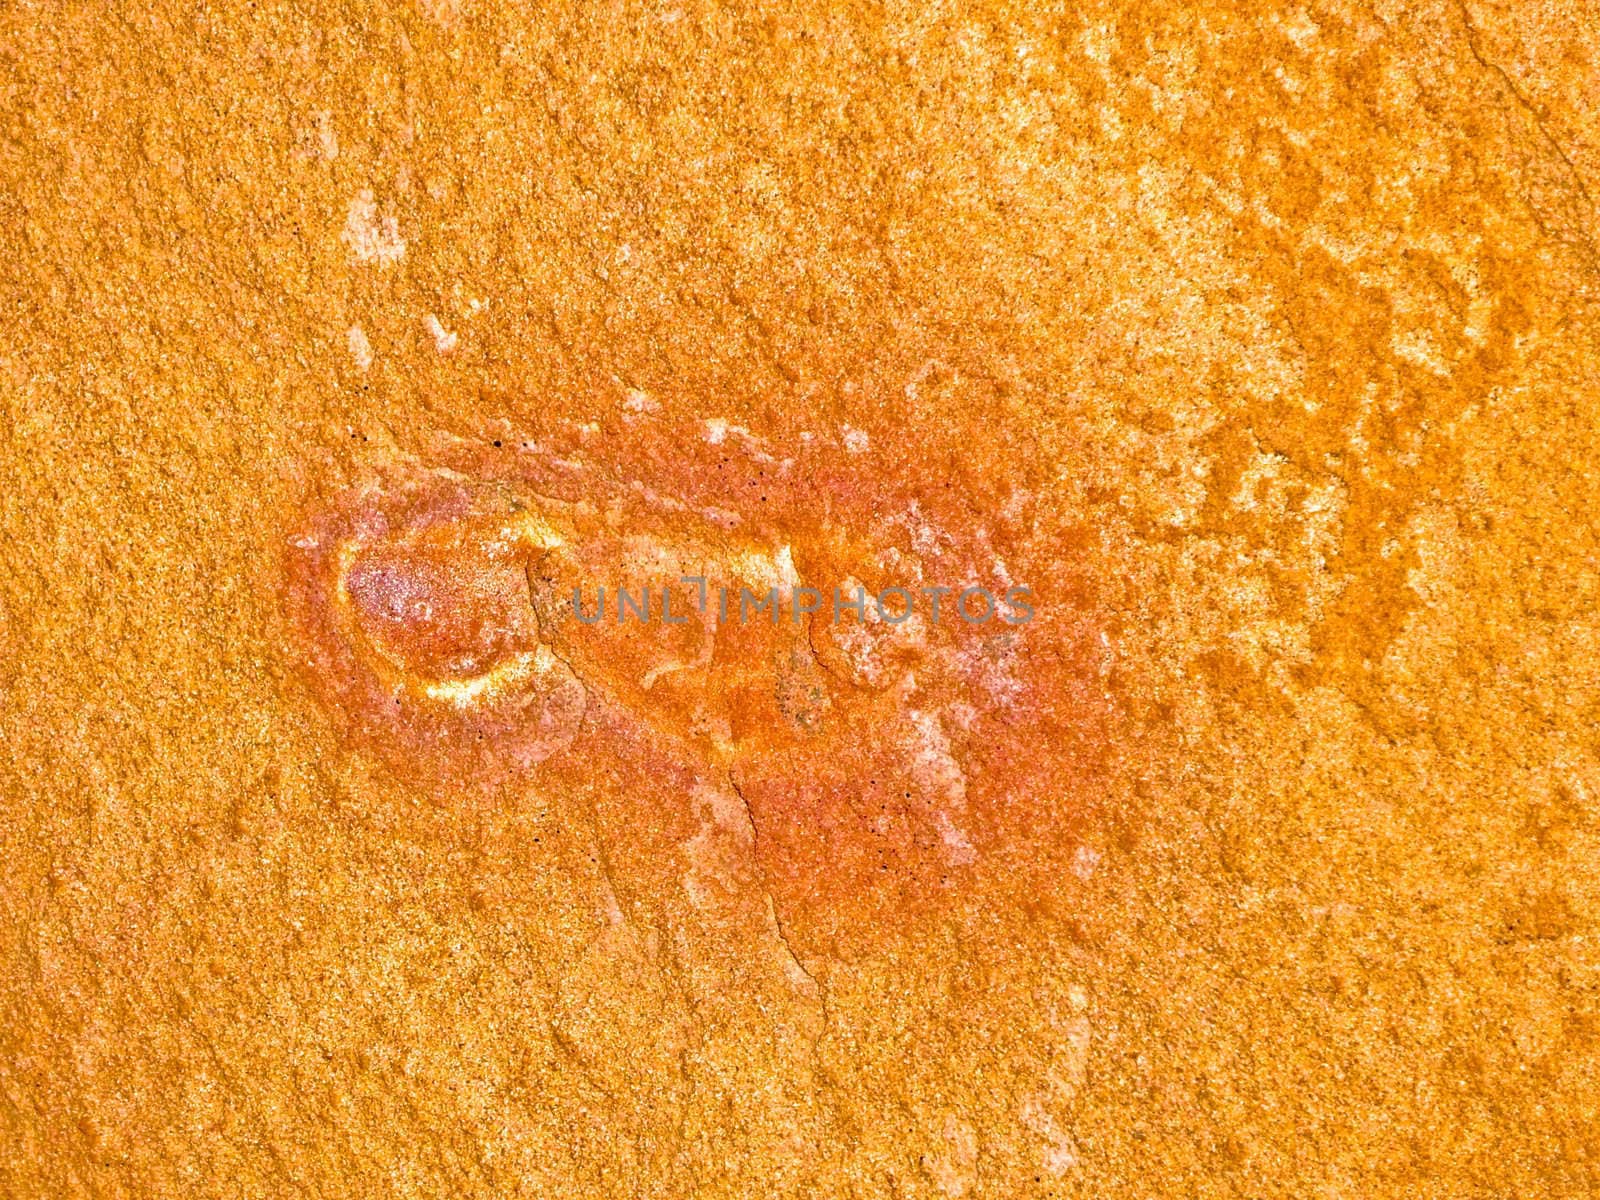 Pictograph of animal on sandstone rocksurface Valley of Fire